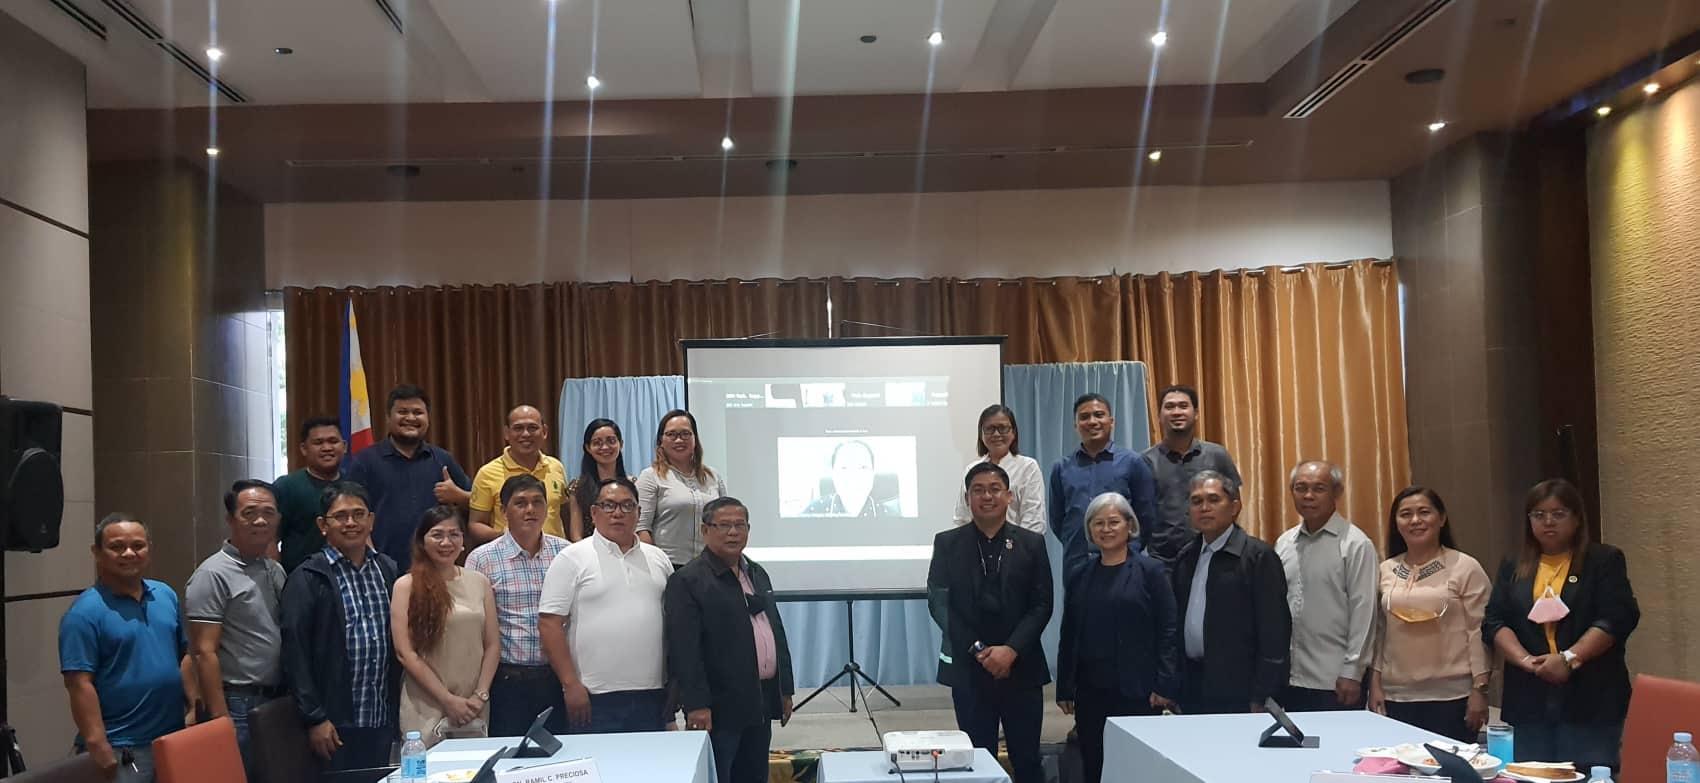 CHED Commissioner Jo Mark M. Libre (1st row, 8th from L-R) leads the photo opportunity with the Board of Regents, key administrative officials and staff of the newly converted SNSU